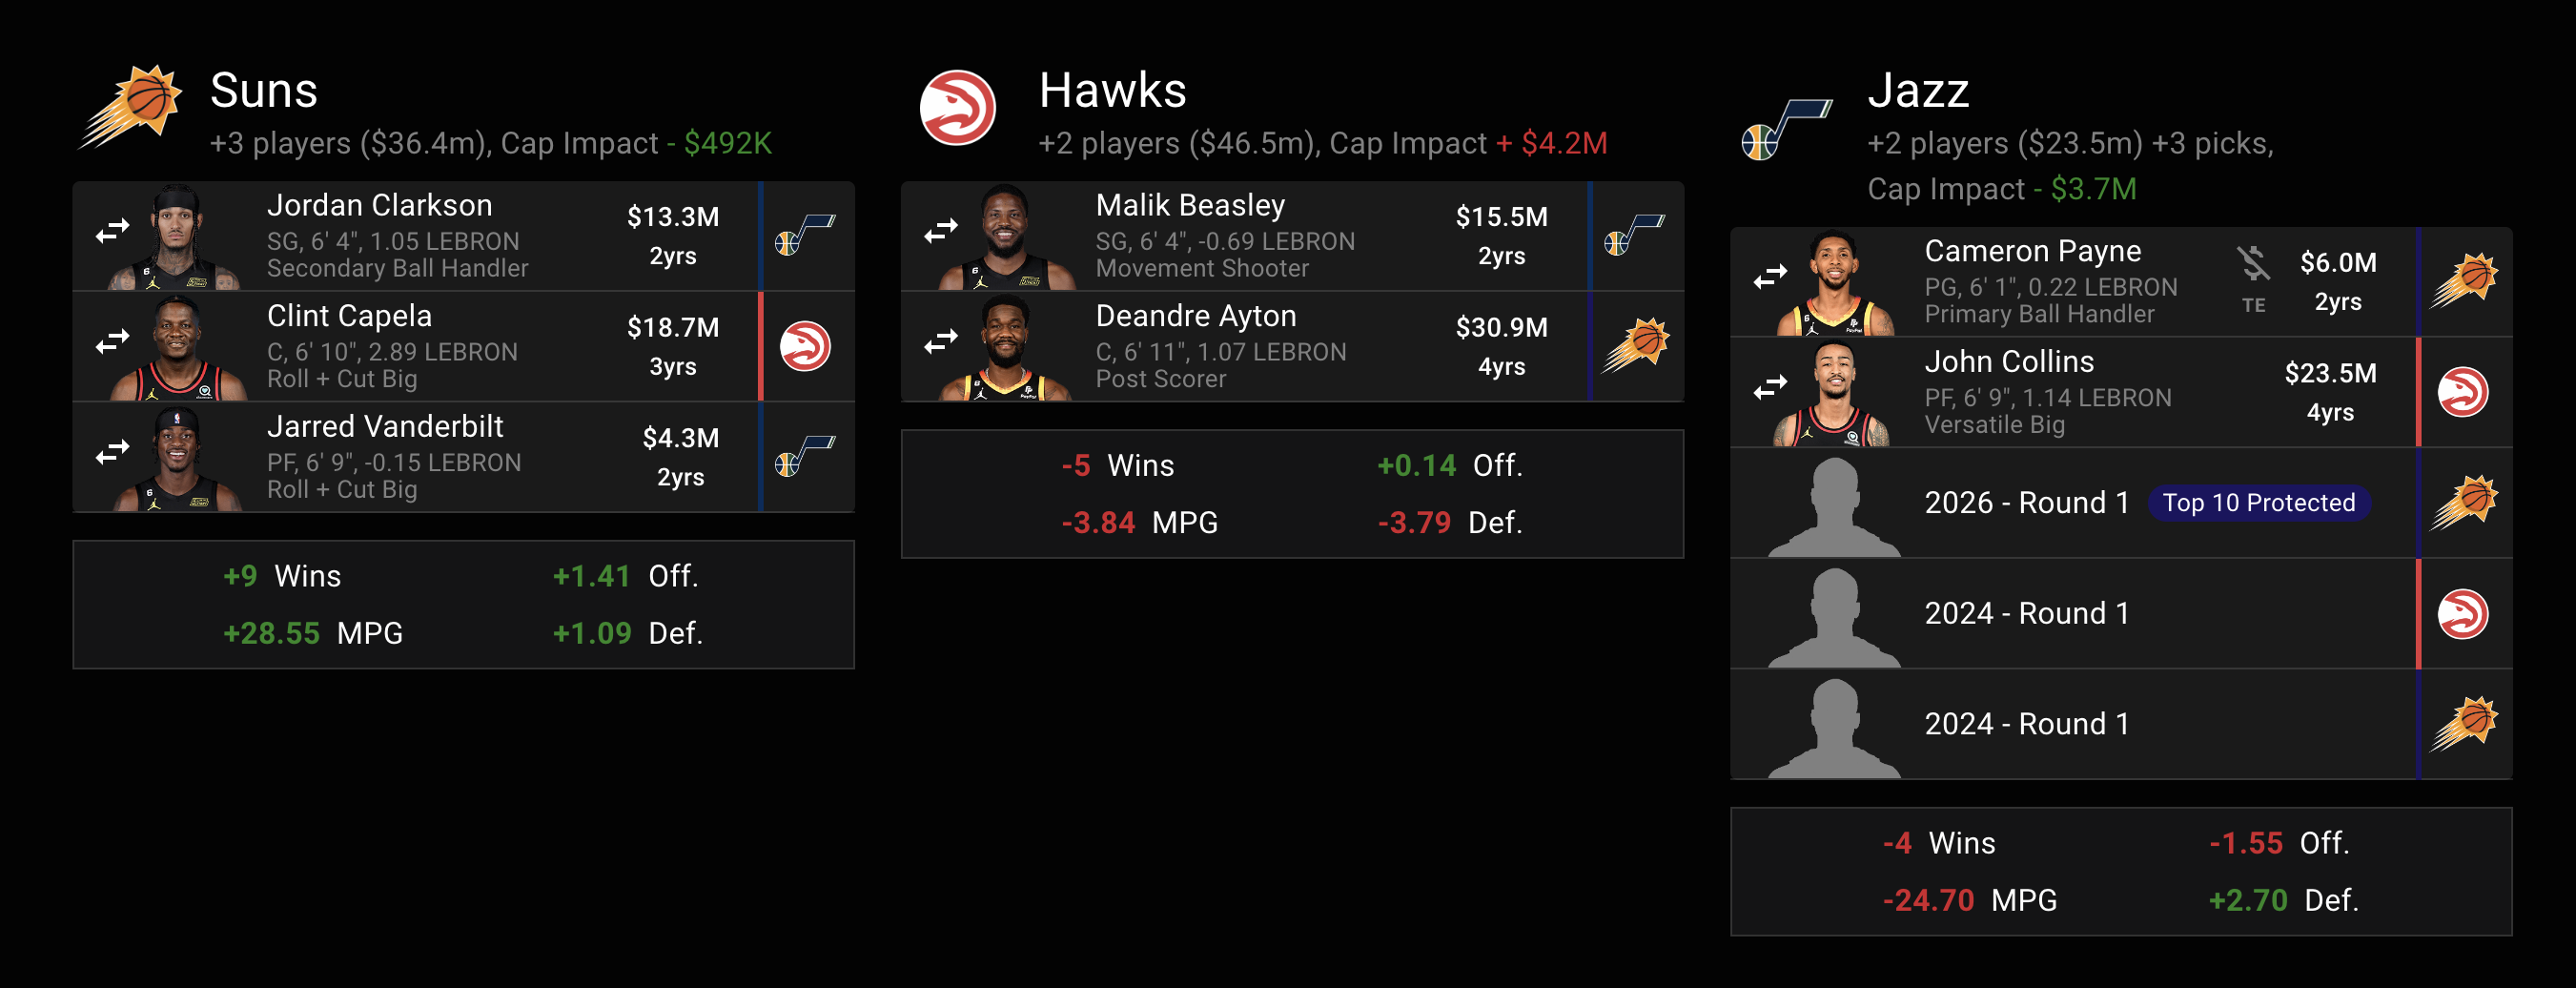 Phoenix Suns make a 3-team trade with Hawks and Jazz.